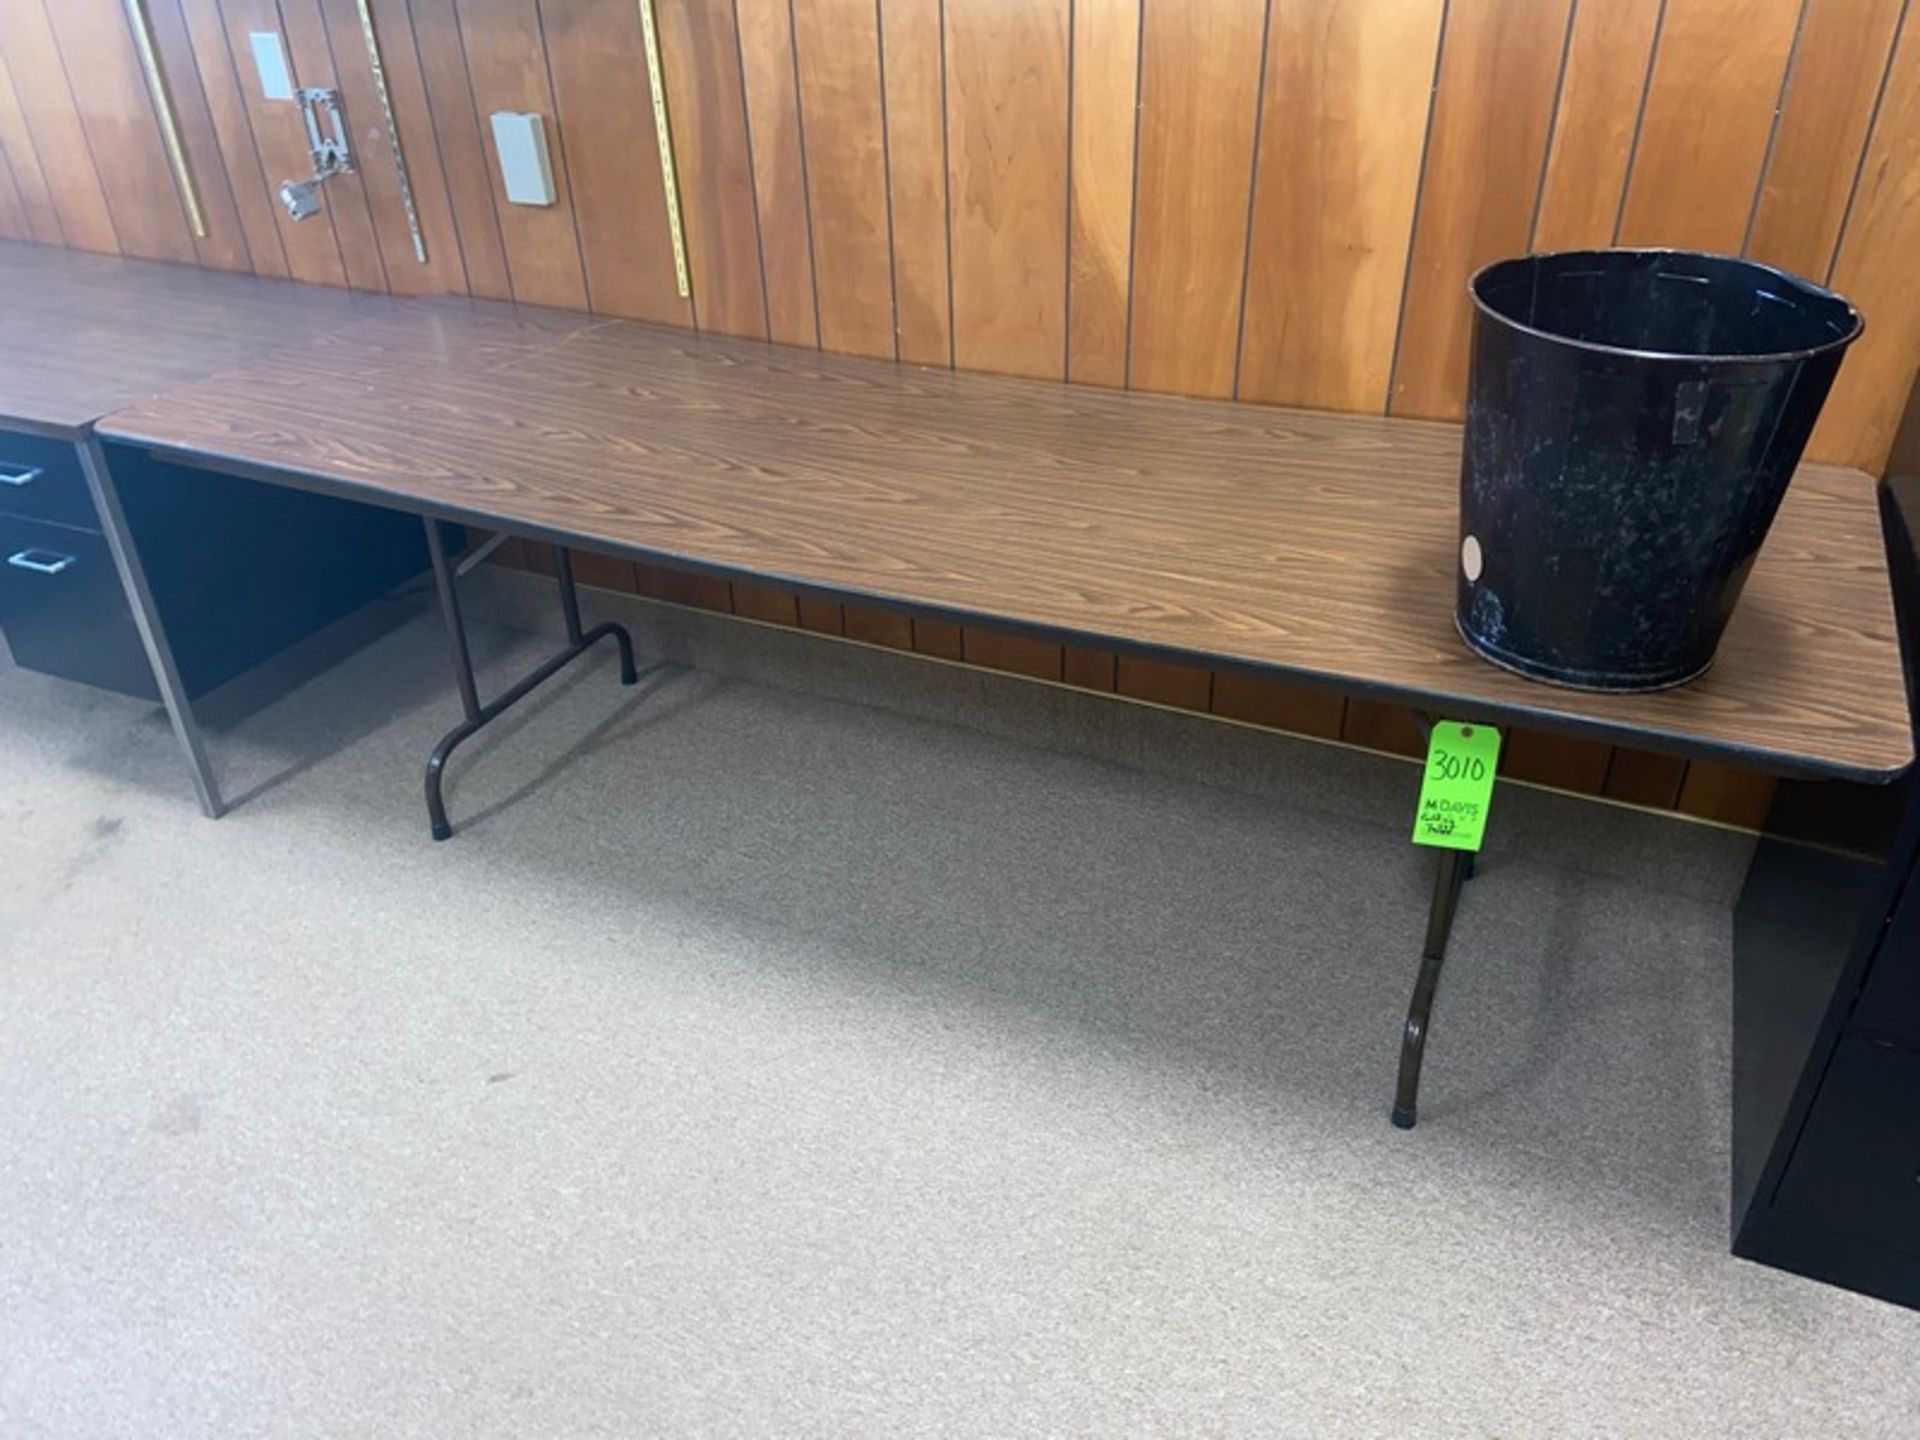 Folding Table (LOCATED IN MONROEVILLE, PA) (RIGGING, LOADING, & SITE MANAGEMENT FEE: $25.00 USD)